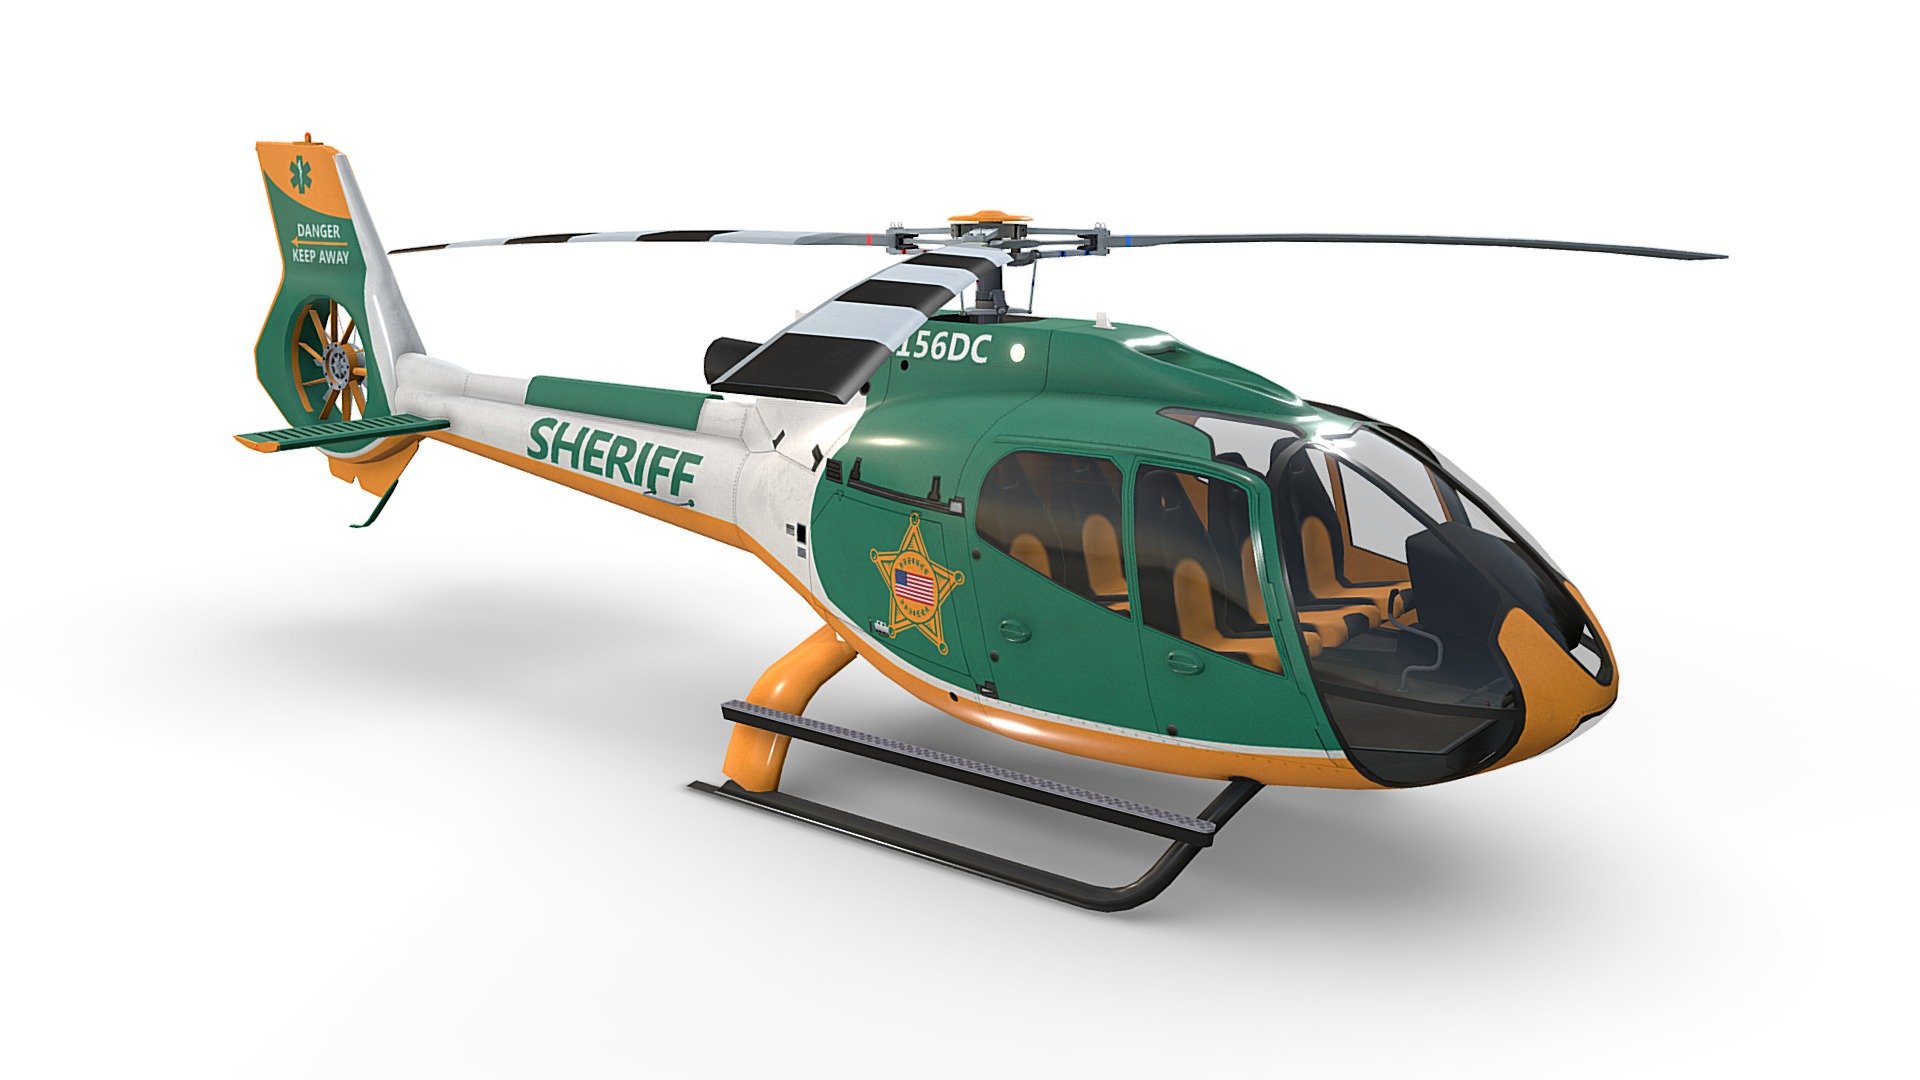 Sheriff Helicopter Airbus H130 Livery 5. Game ready, realtime optimized Airbus Helicopter H130 with high visual accuracy. Both PBR workflows ready native 4096 x 4096 px textures. Clean lowpoly mesh with 4 preconfigured level of details LOD0 19710 tris, LOD1 10462 tris, LOD2 7388 tris, LOD3 5990 tris. Properly placed rotors pivots for flawless rotations. Simple capsule built interior that fits perfectly the body. 100% human controlled triangulation. All parts 100% unwrapped non-overlapping. Made using blueprints in real world scale meters. Included are flawless files .max (native 3dsmax 2014), .fbx, and .obj. All LOD are exported seperately and together in each file format 3d model